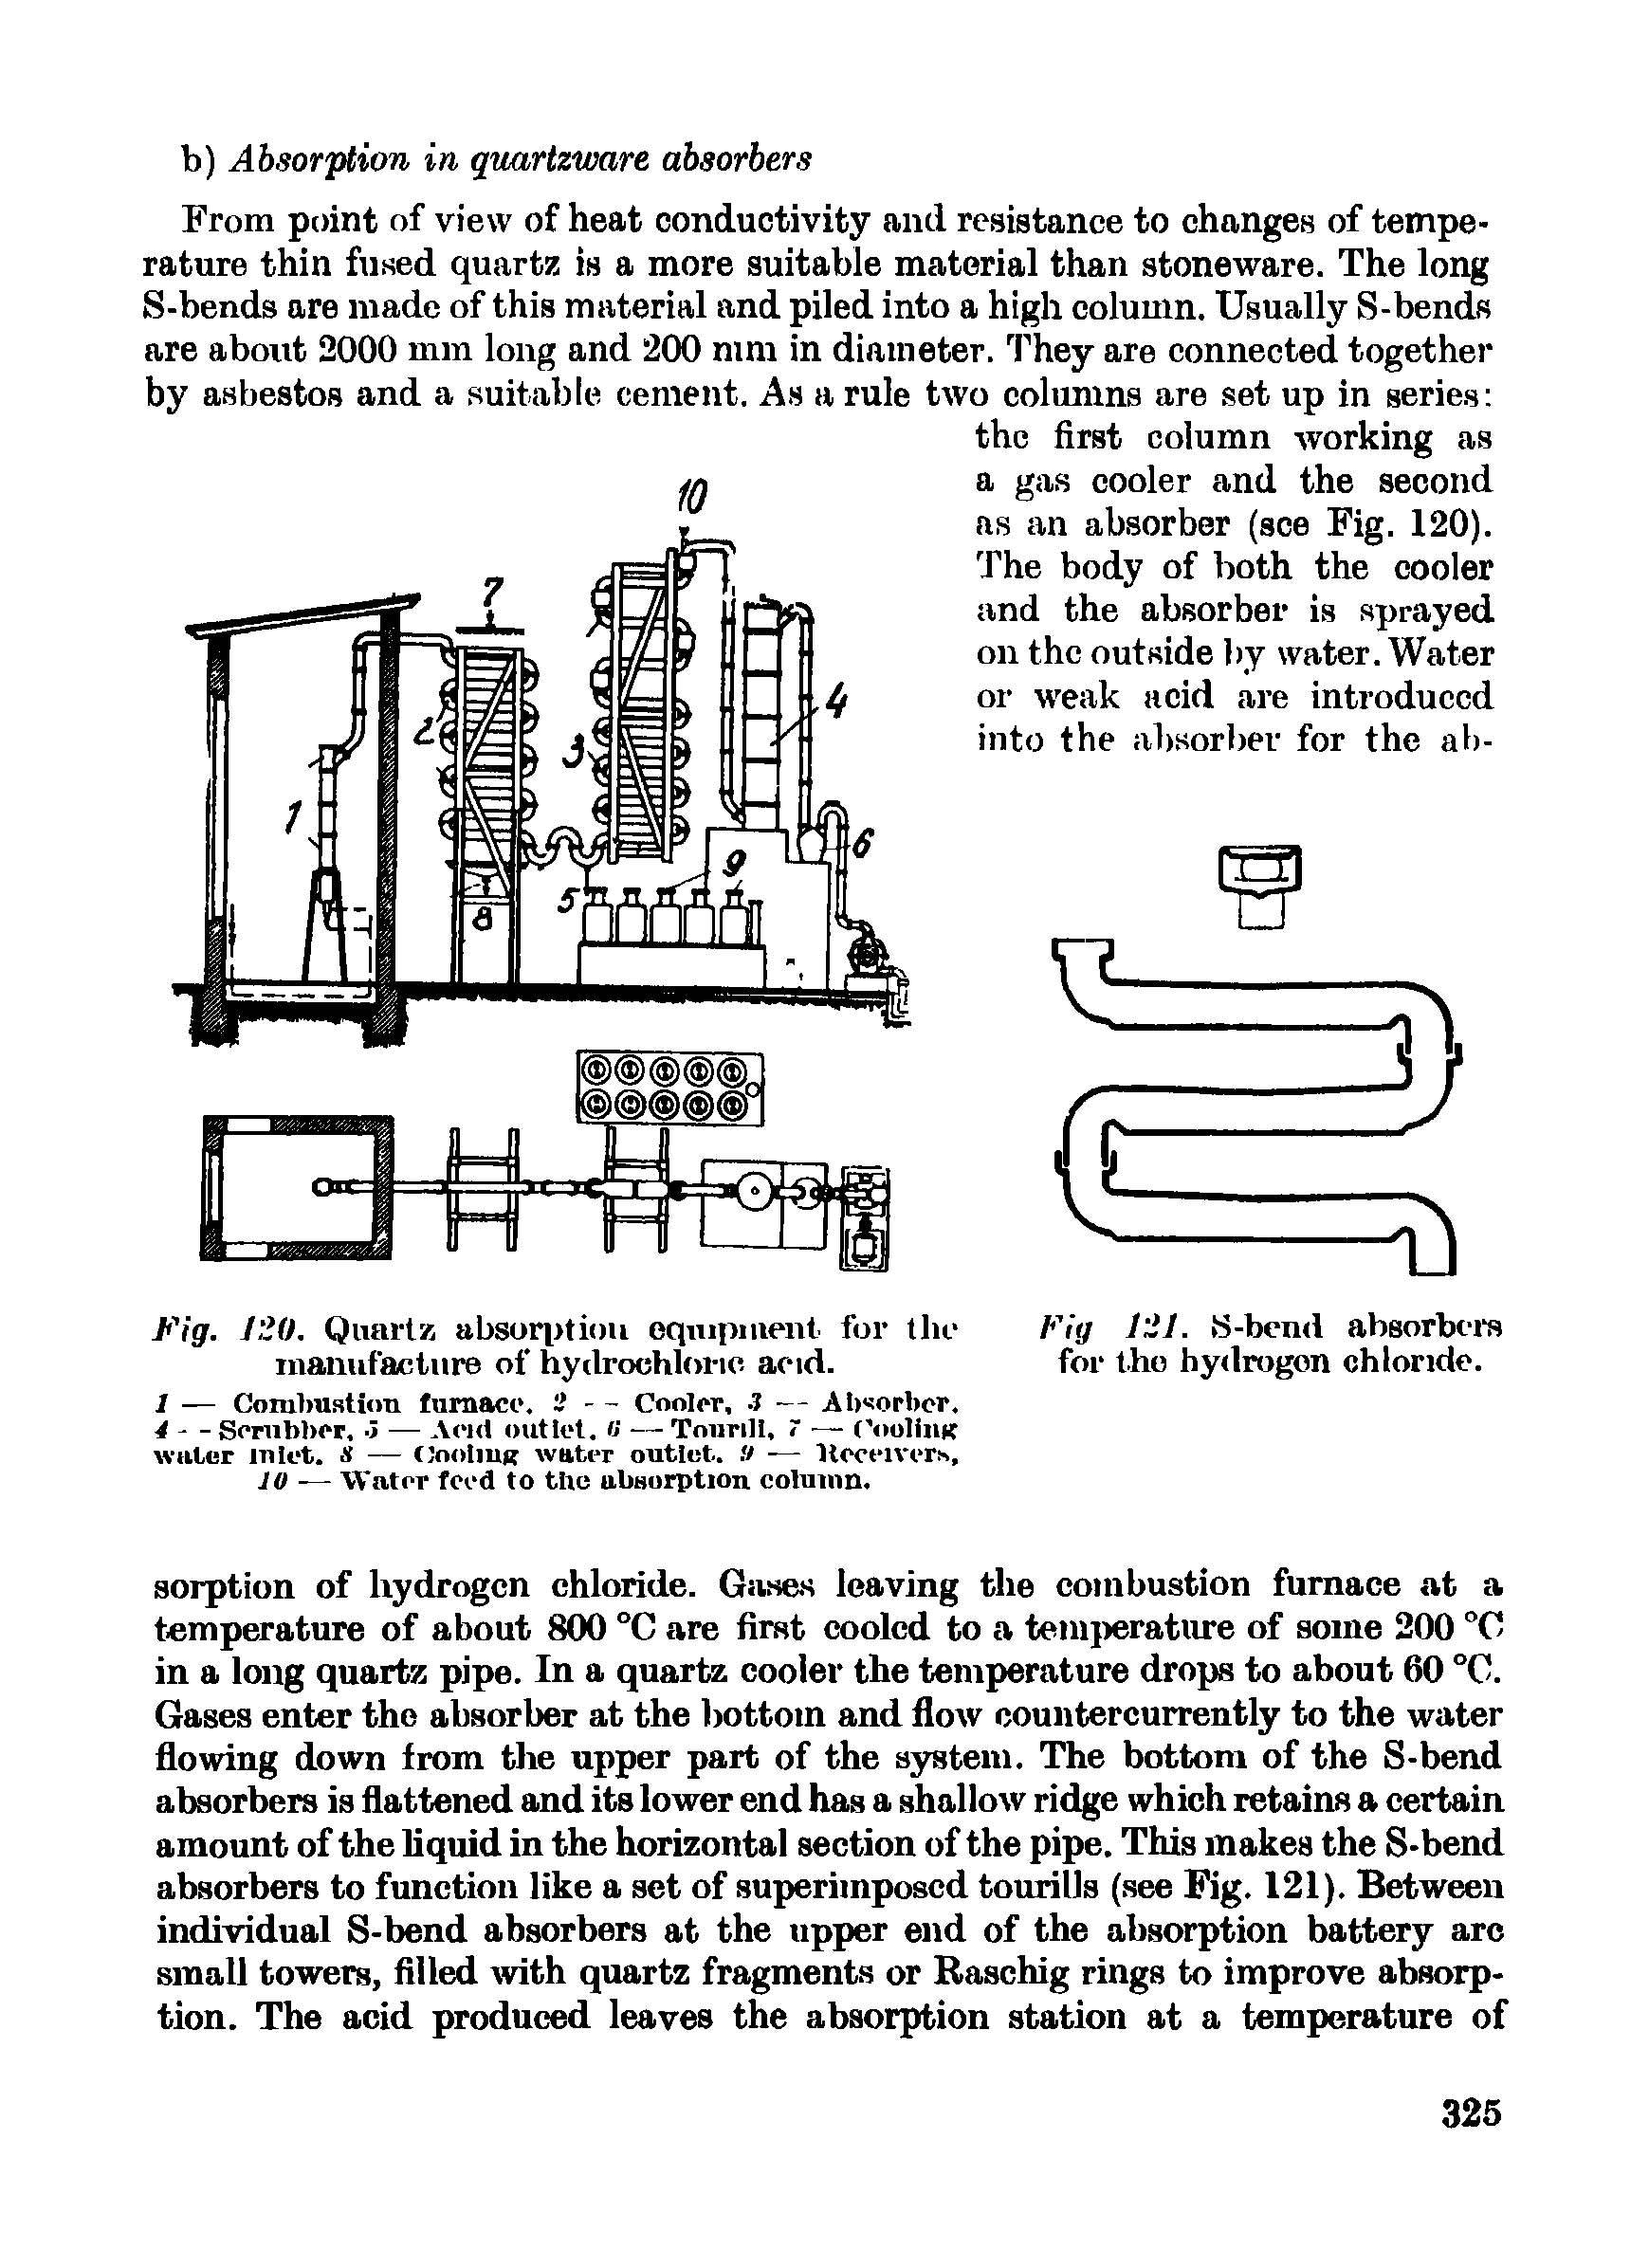 Fig. 120. Quartz absorption equipment for the manufacture of hydrochloric acid.